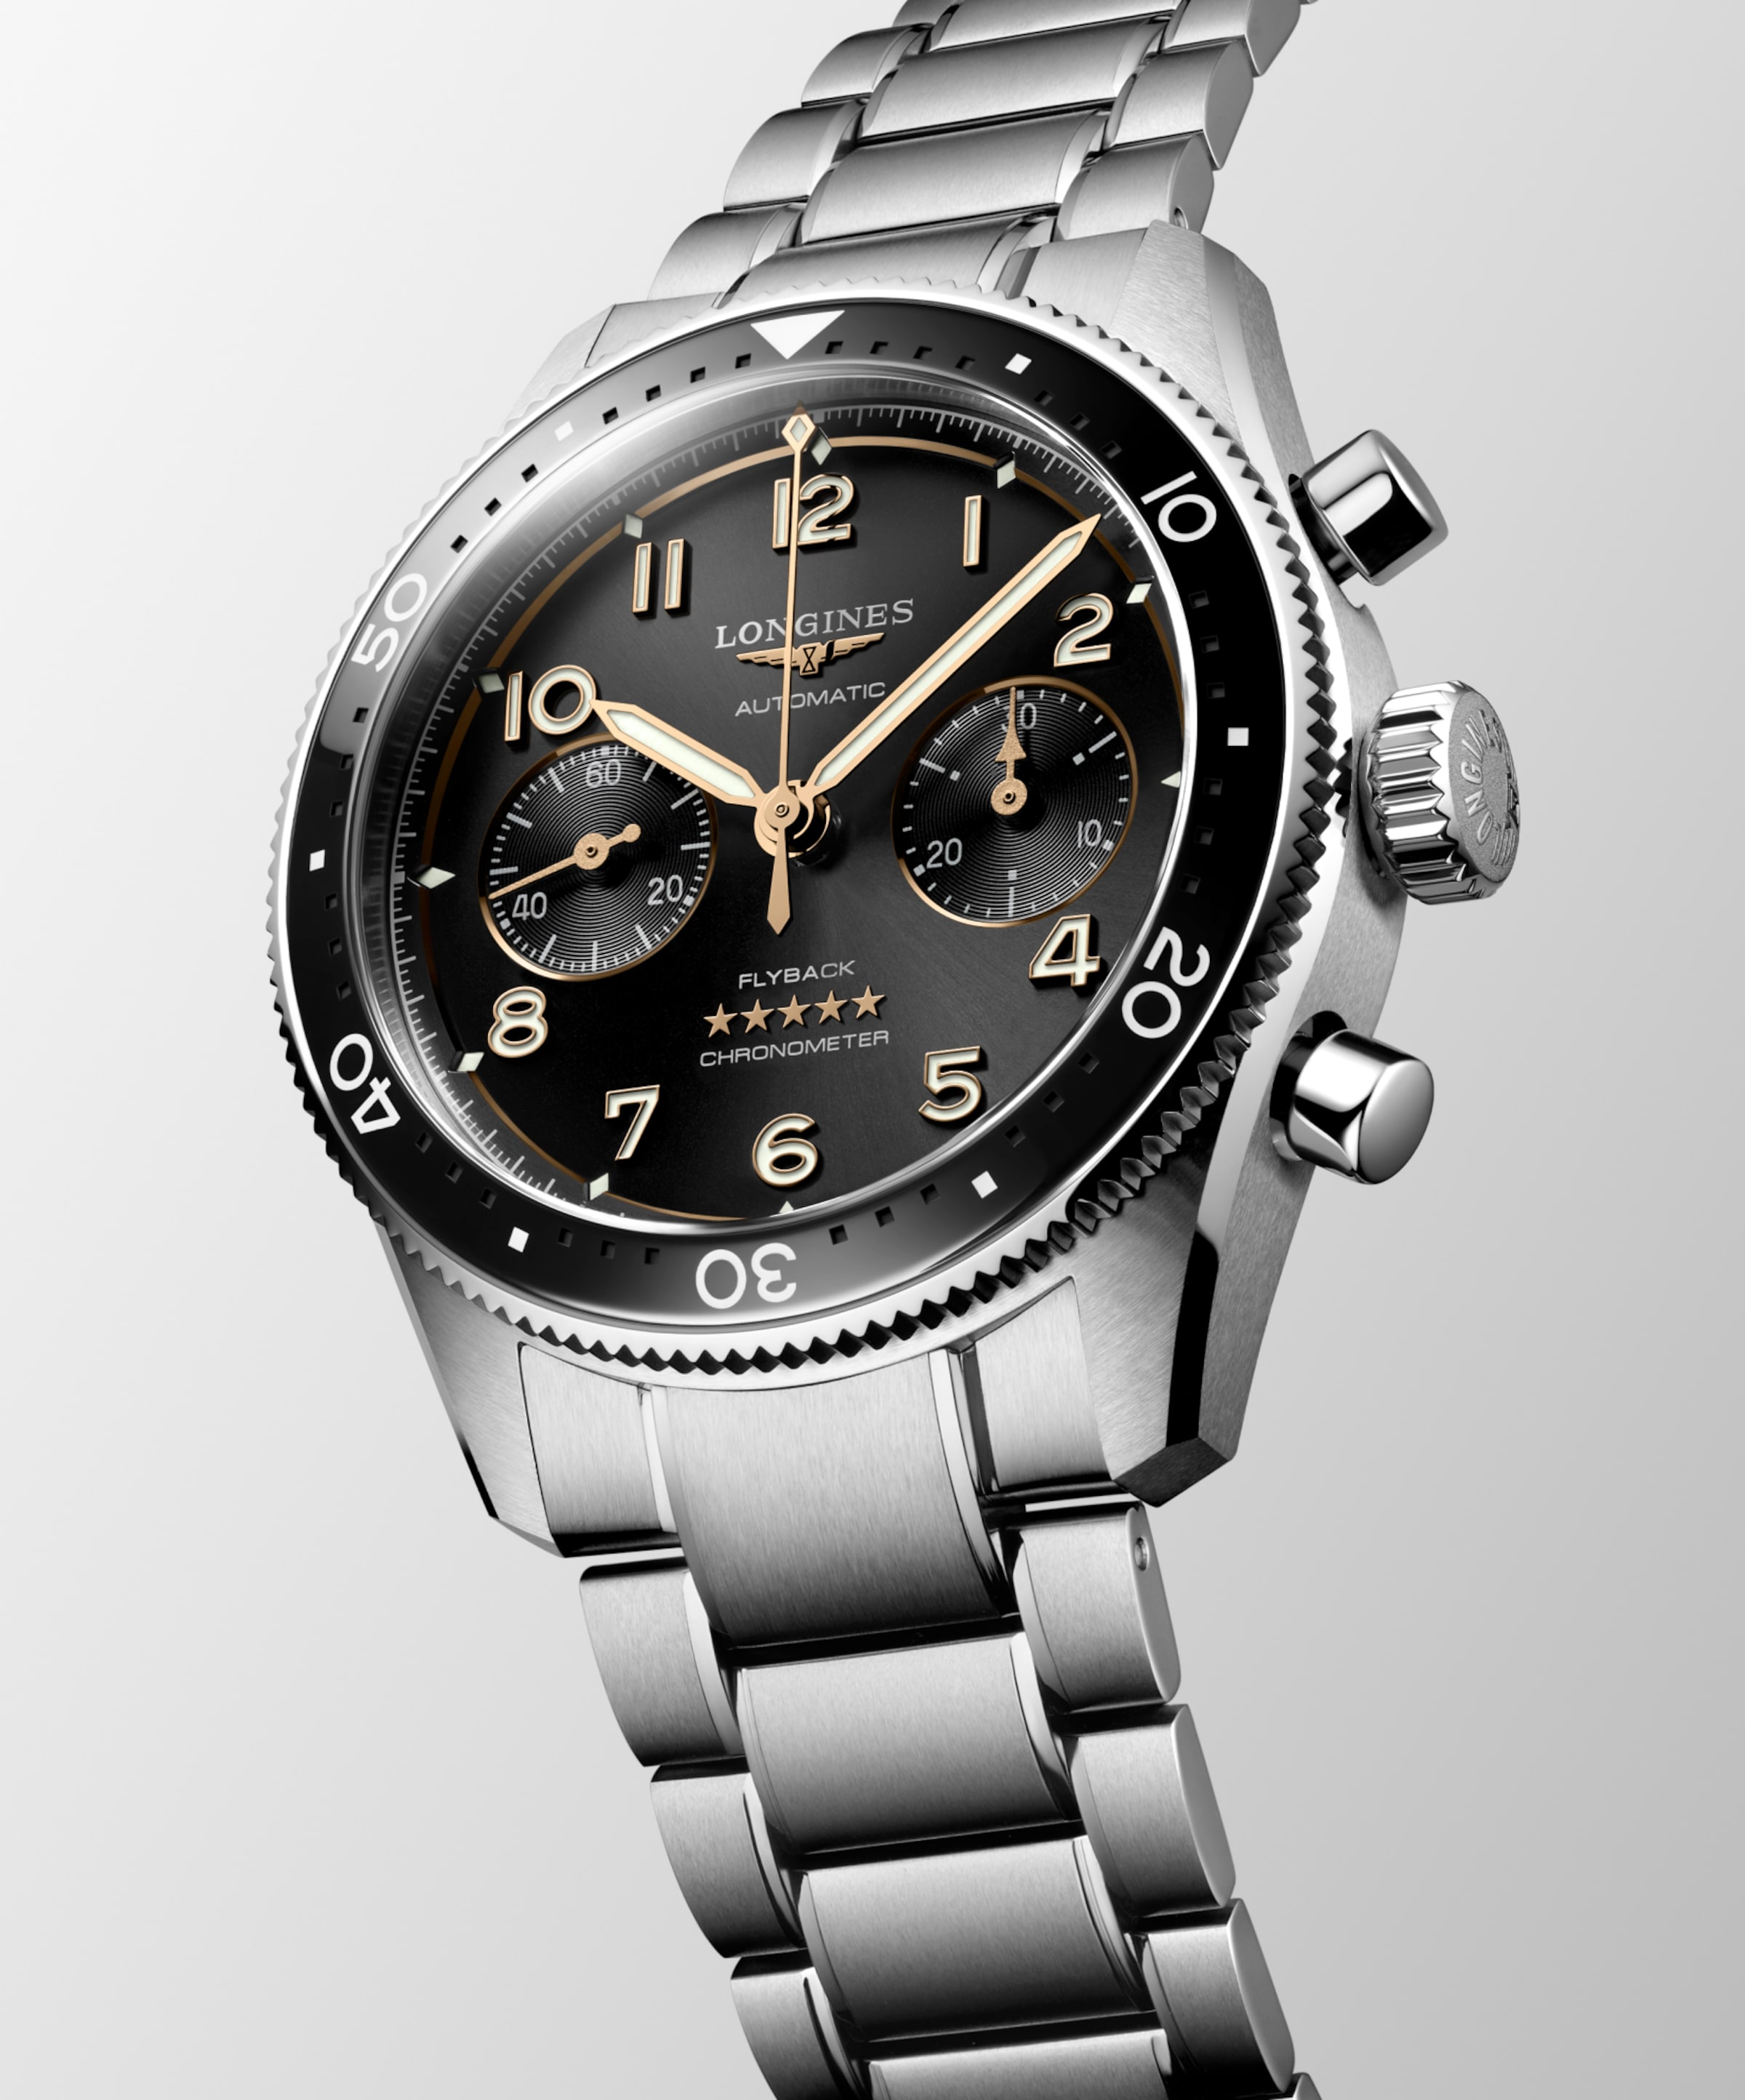 Longines SPIRIT Automatic Stainless steel and ceramic bezel Watch - L3.821.4.53.6